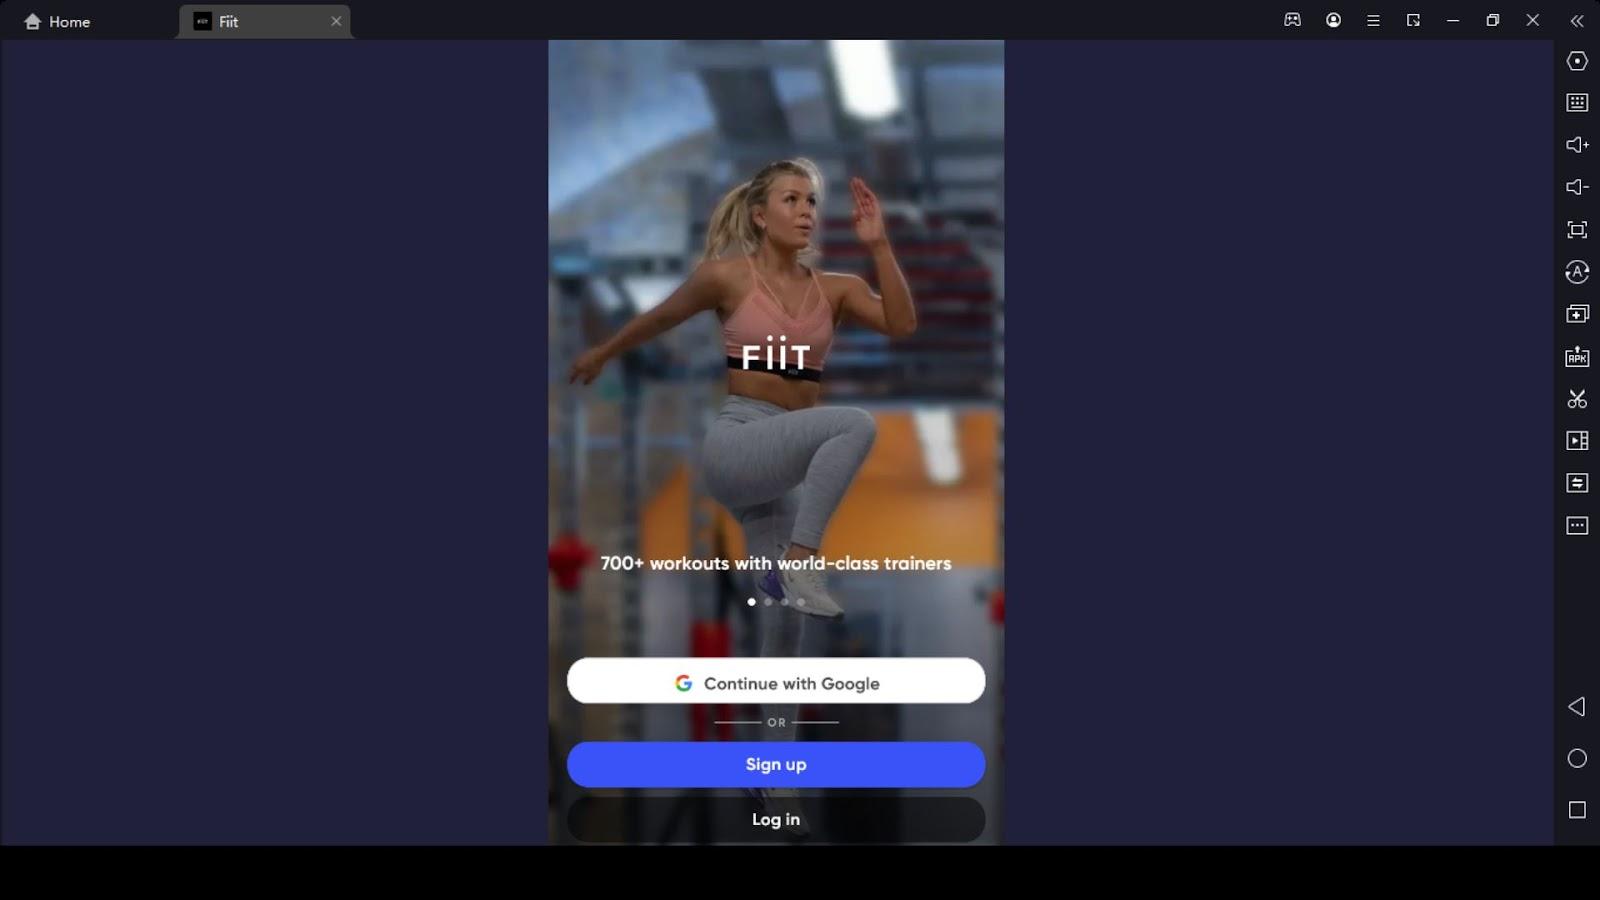 Fiit: Workouts & Fitness Plans